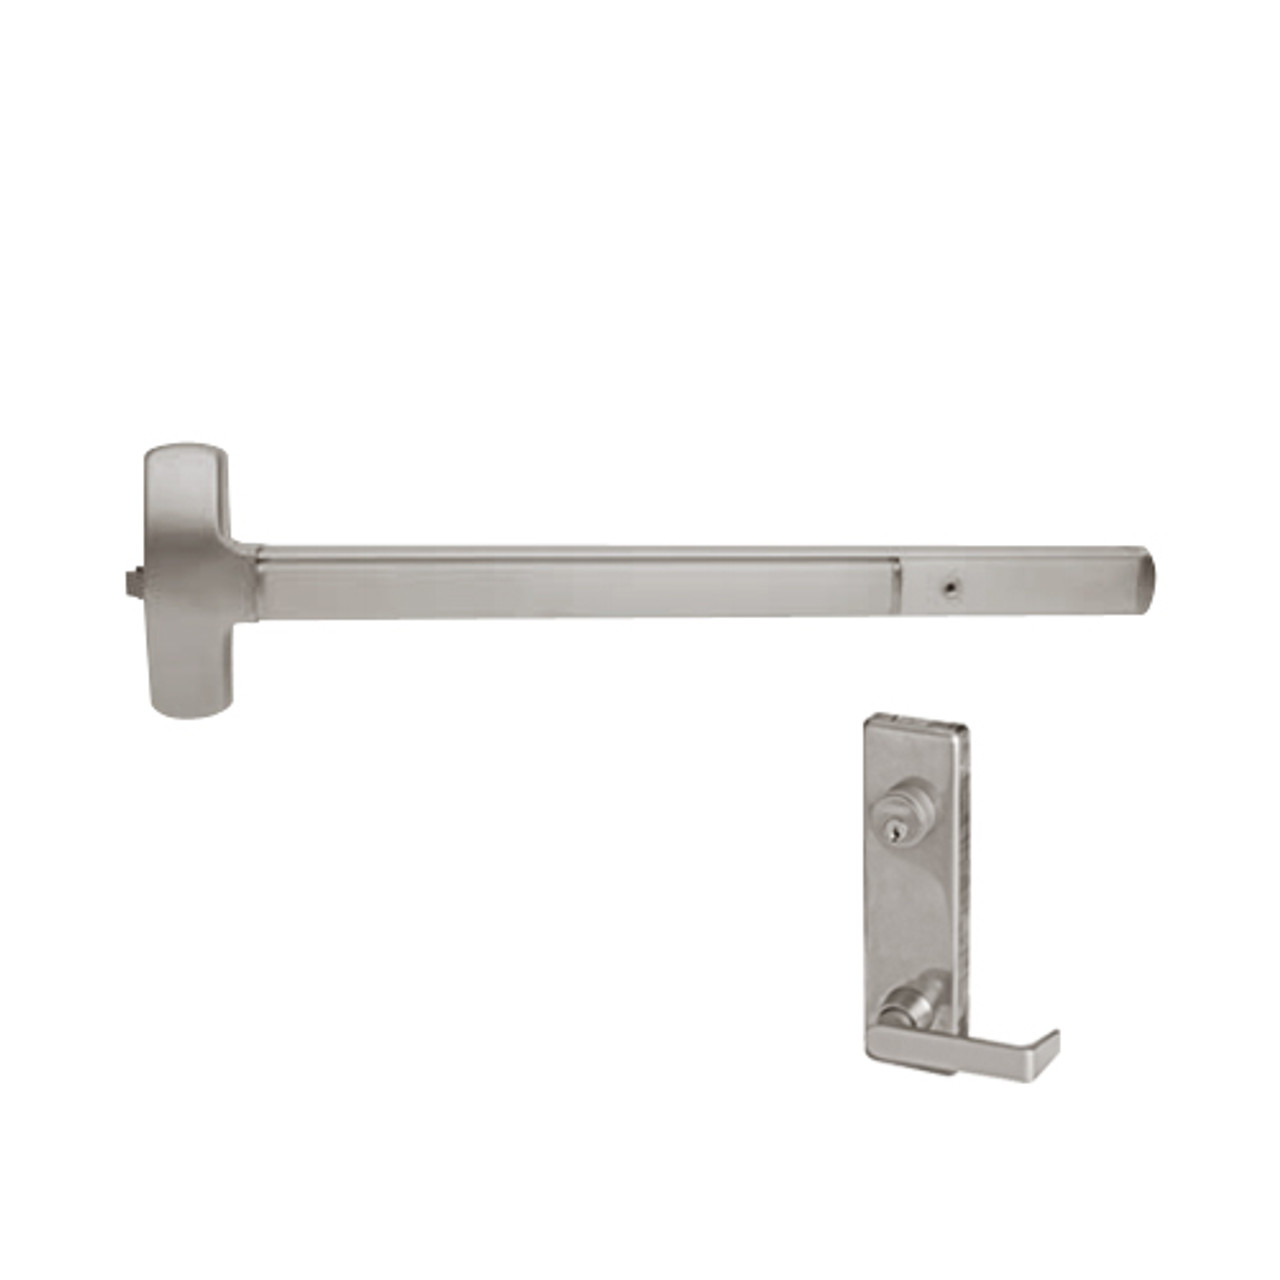 25-R-L-NL-DANE-US32D-4-LHR Falcon Exit Device in Satin Stainless Steel